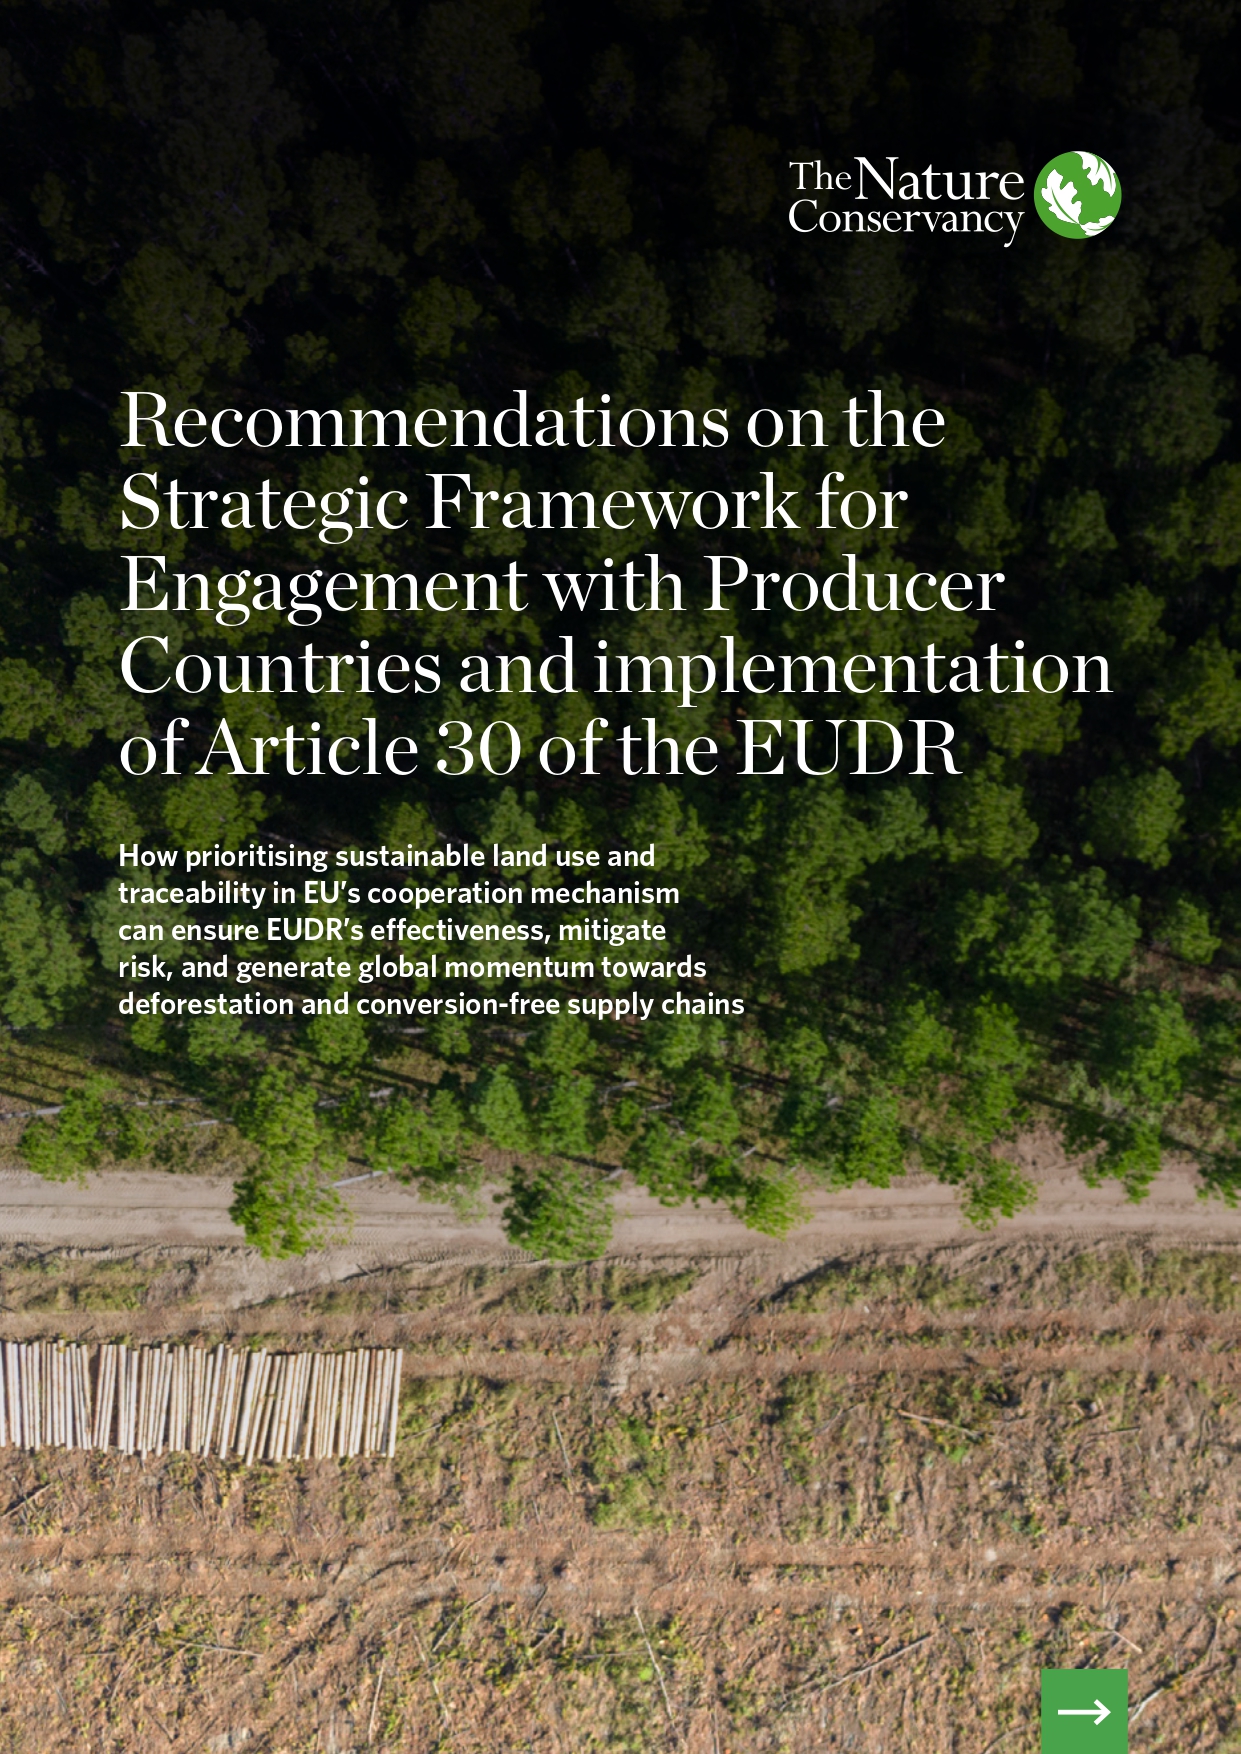 Cover of the recommendations document.